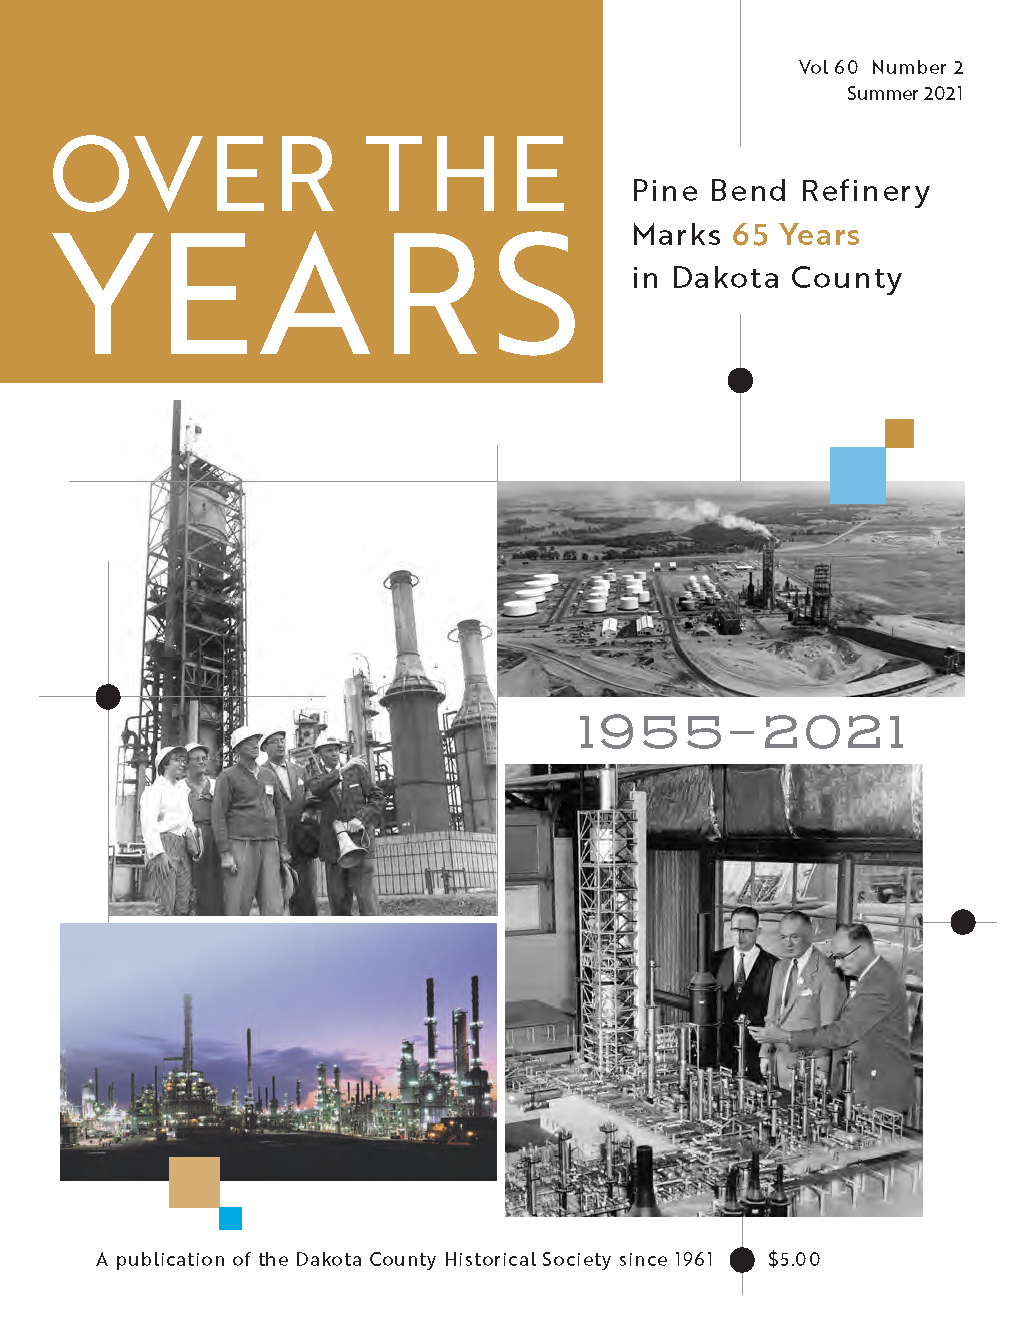 Over the Years: Pine Bend Refinery Marks 65 Years in Dakota County